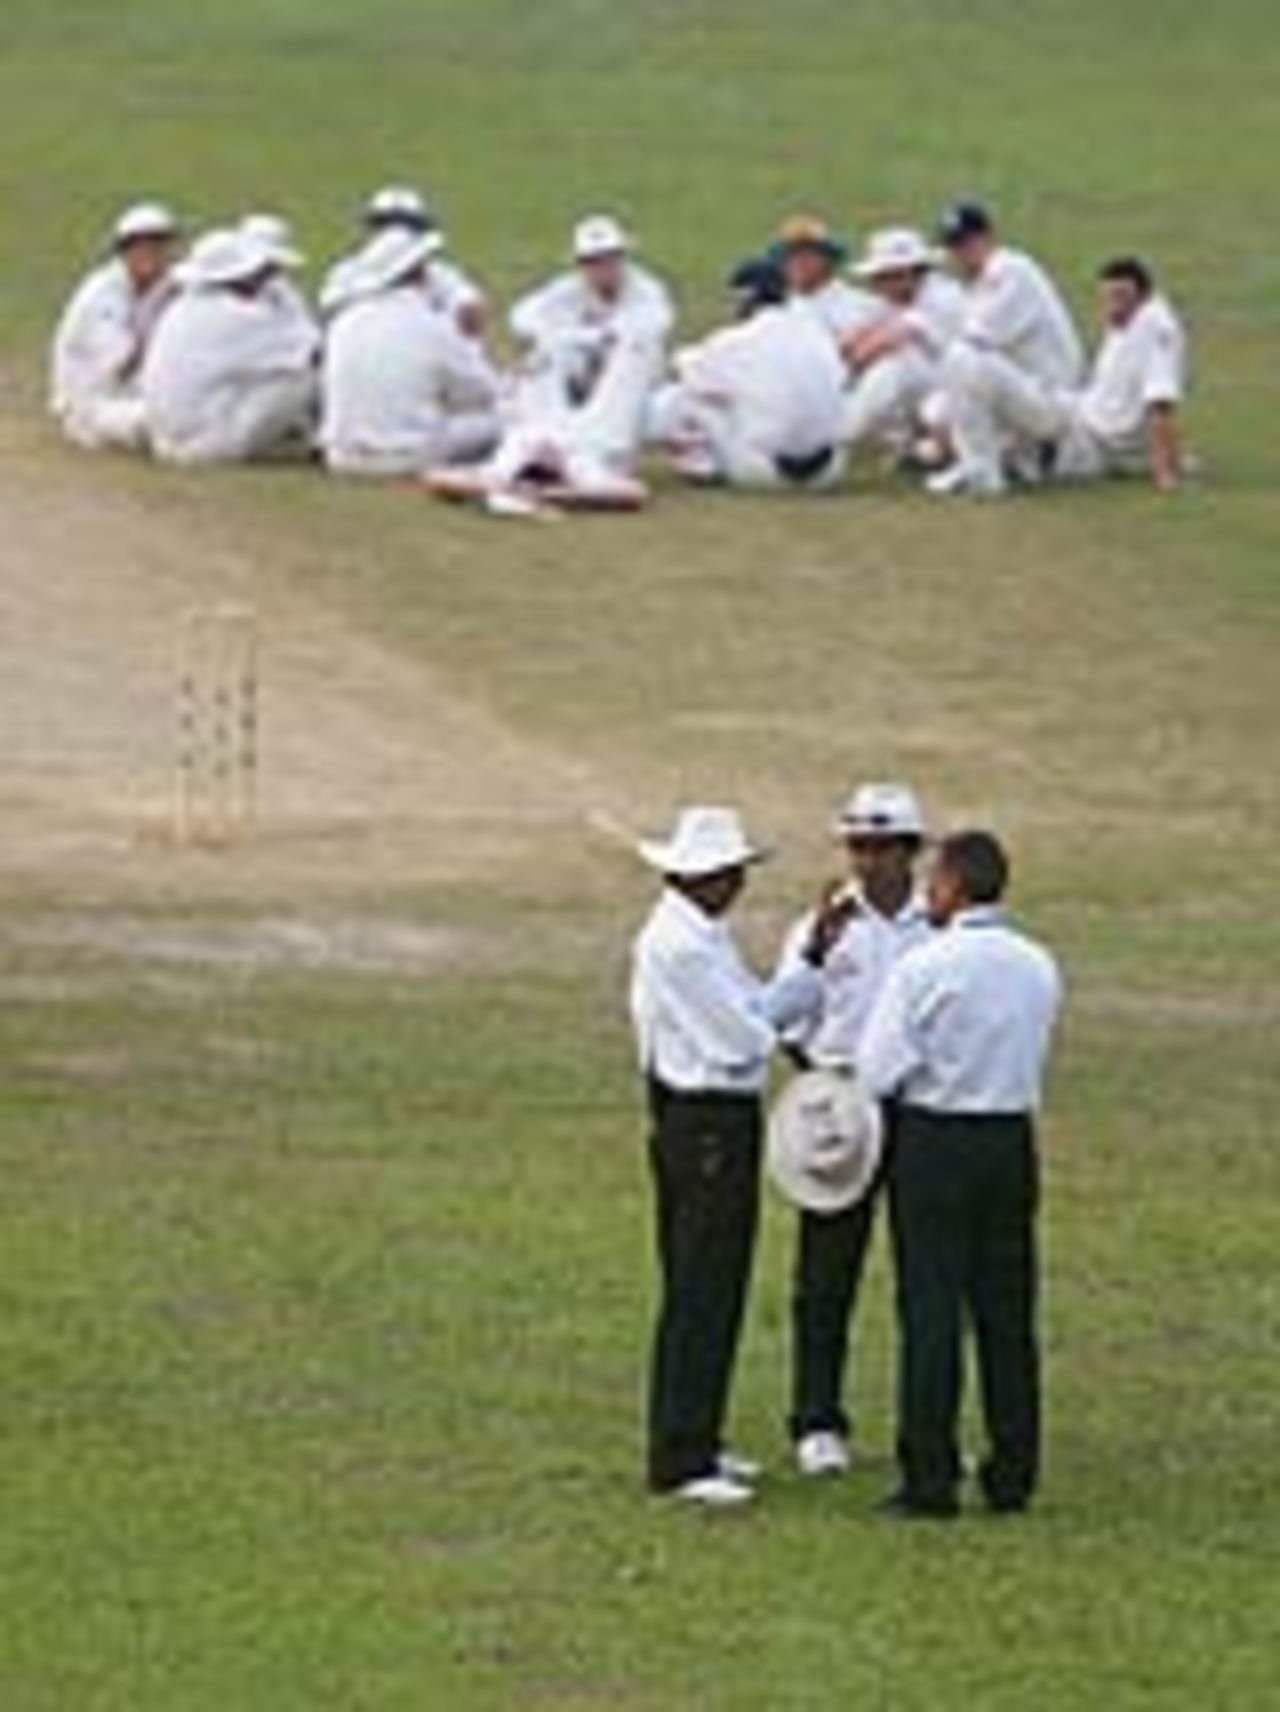 England players sit on the outfield and wait following a power cut, Bangladesh v England, 1st Test, Dhaka, October 23, 2003